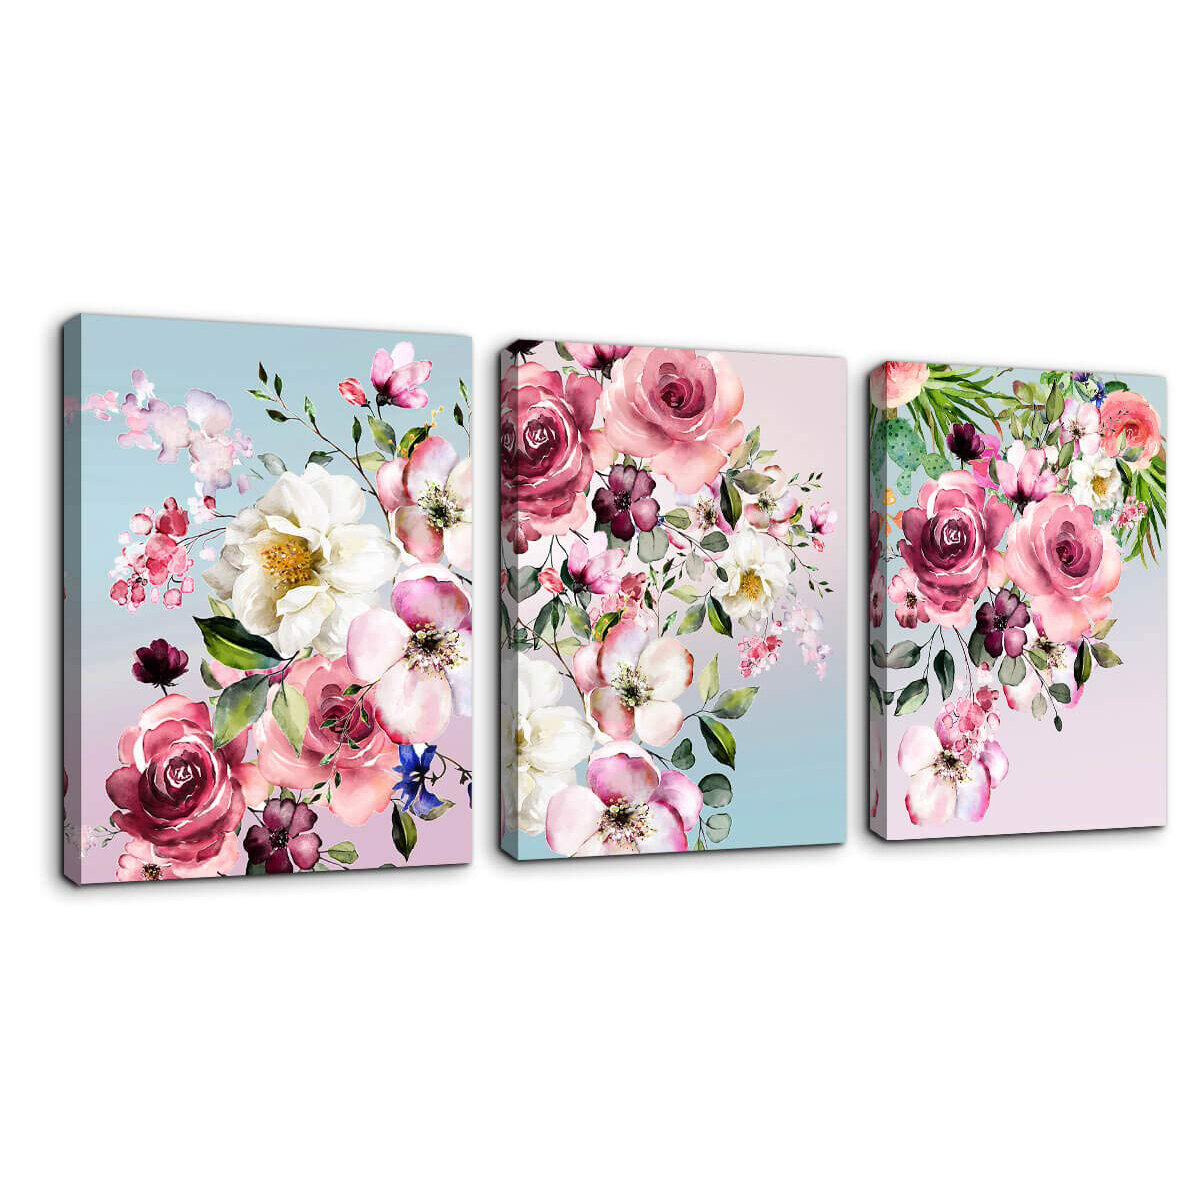 3pcs Canvas Flower Wall Hanging Pictures Modern Plant Floral Framed/Frameless for Home Bathroom Girls Room Wall Decoration